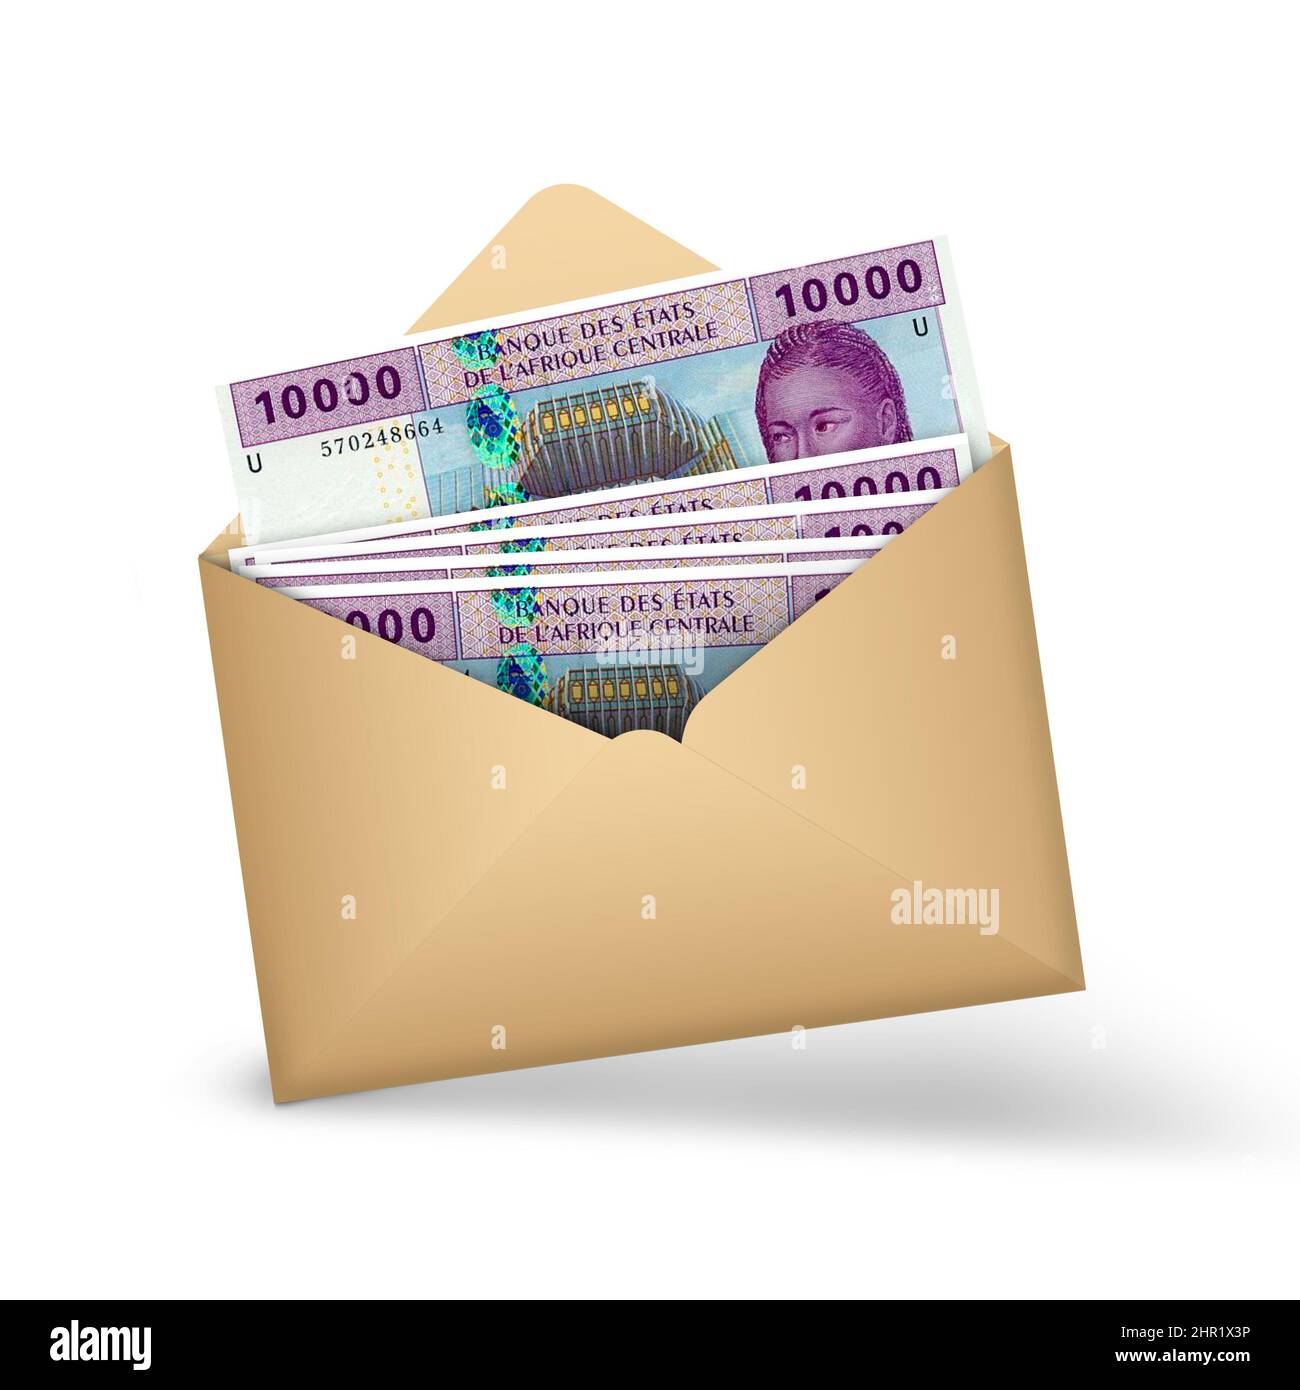 10000 Central African CFA franc notes inside an open brown envelope. 3D illustration of money in an open envelope Stock Photo